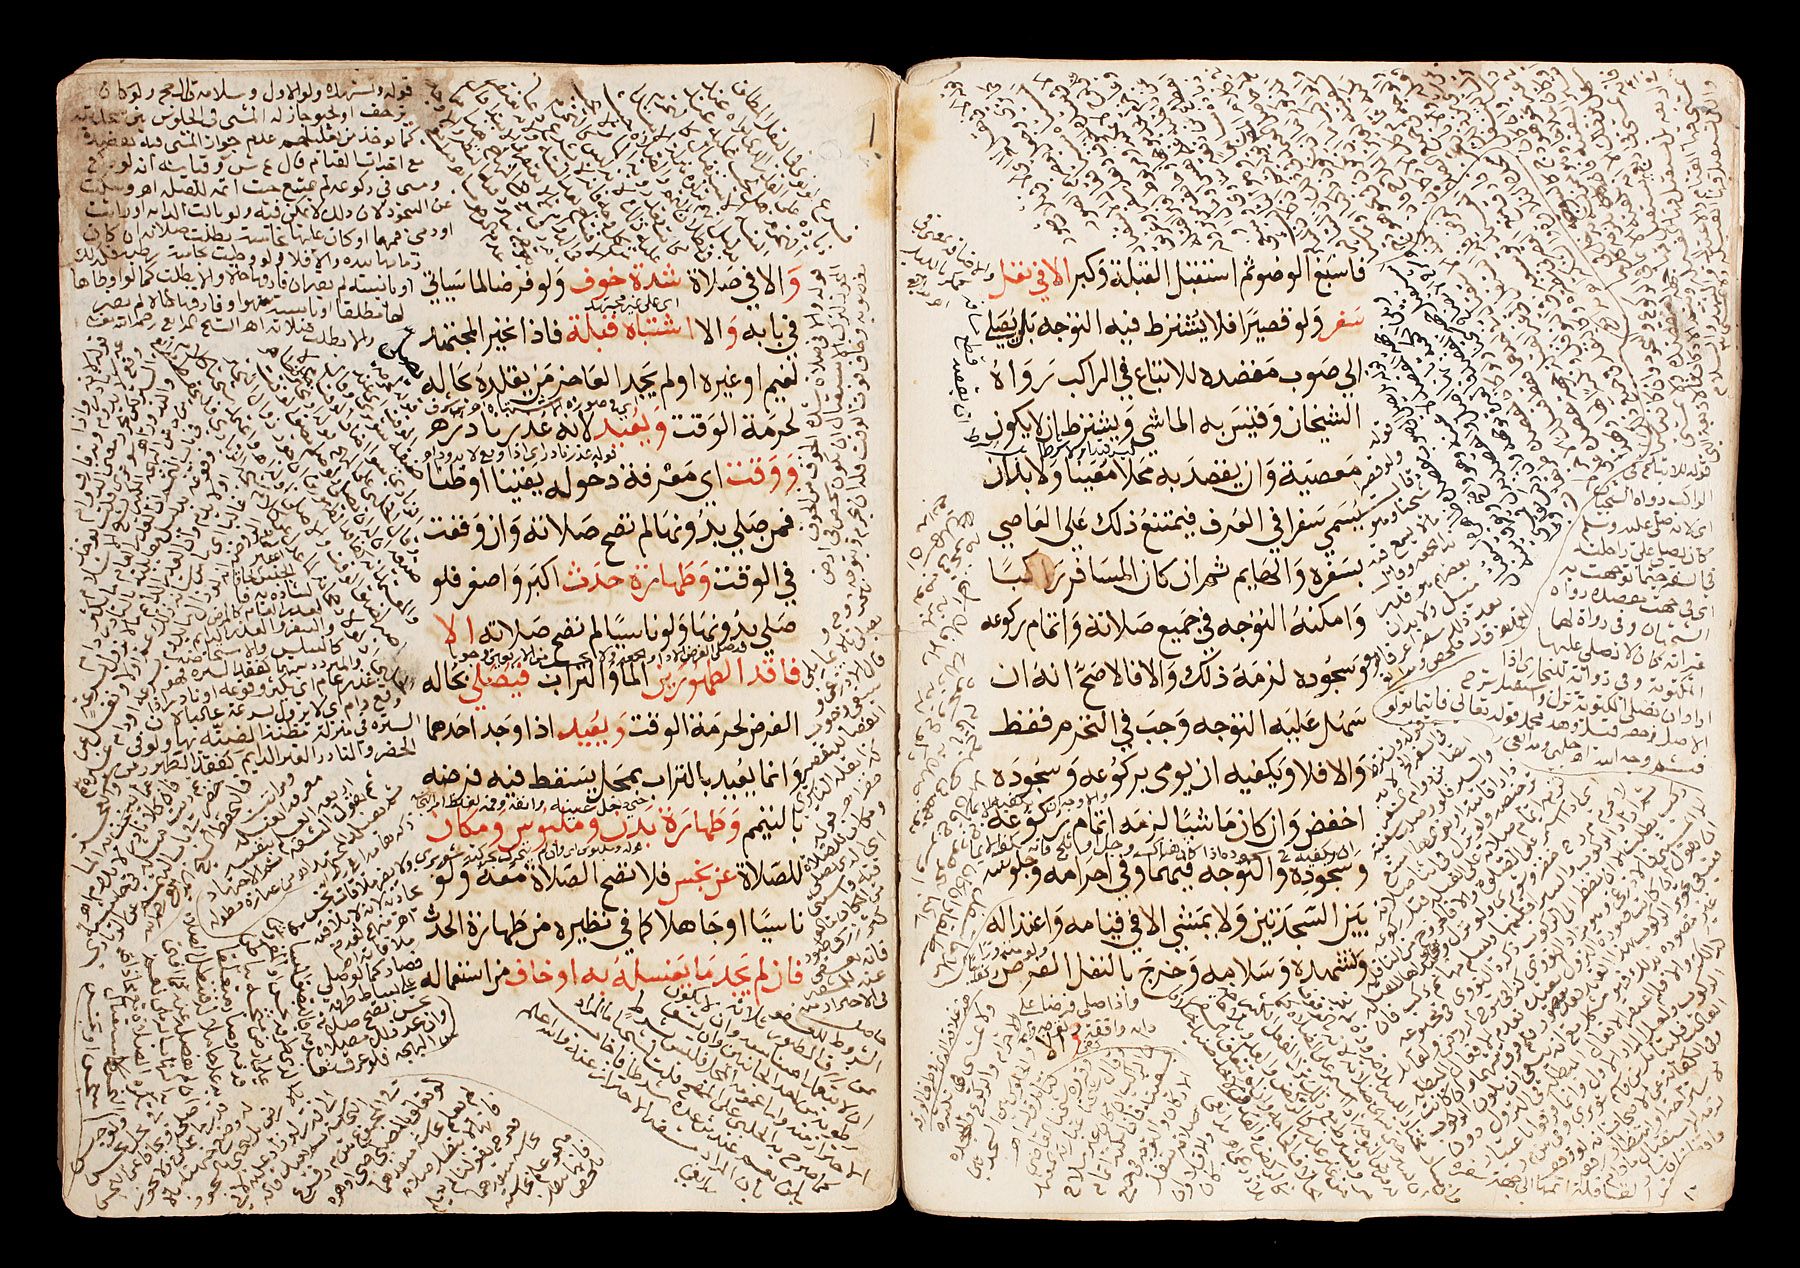 18th-c. legal text from Āl Budeiry Library (<a href='https://w3id.org/vhmml/readingRoom/view/133290'>ABLJ 198</a>)